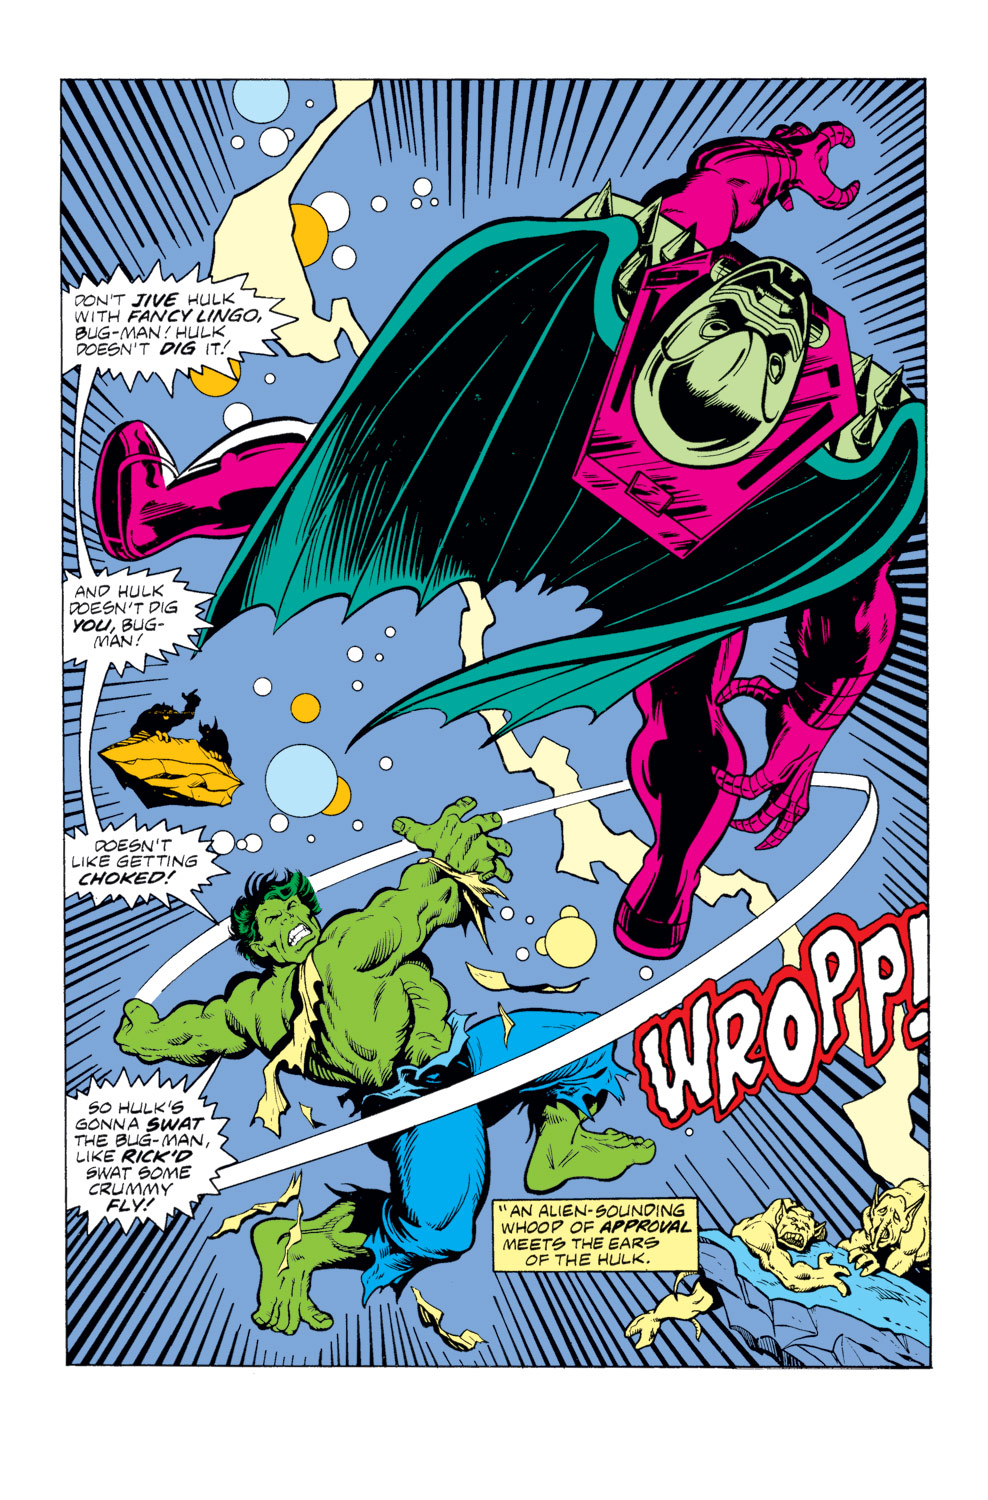 What If? (1977) issue 12 - Rick Jones had become the Hulk - Page 24